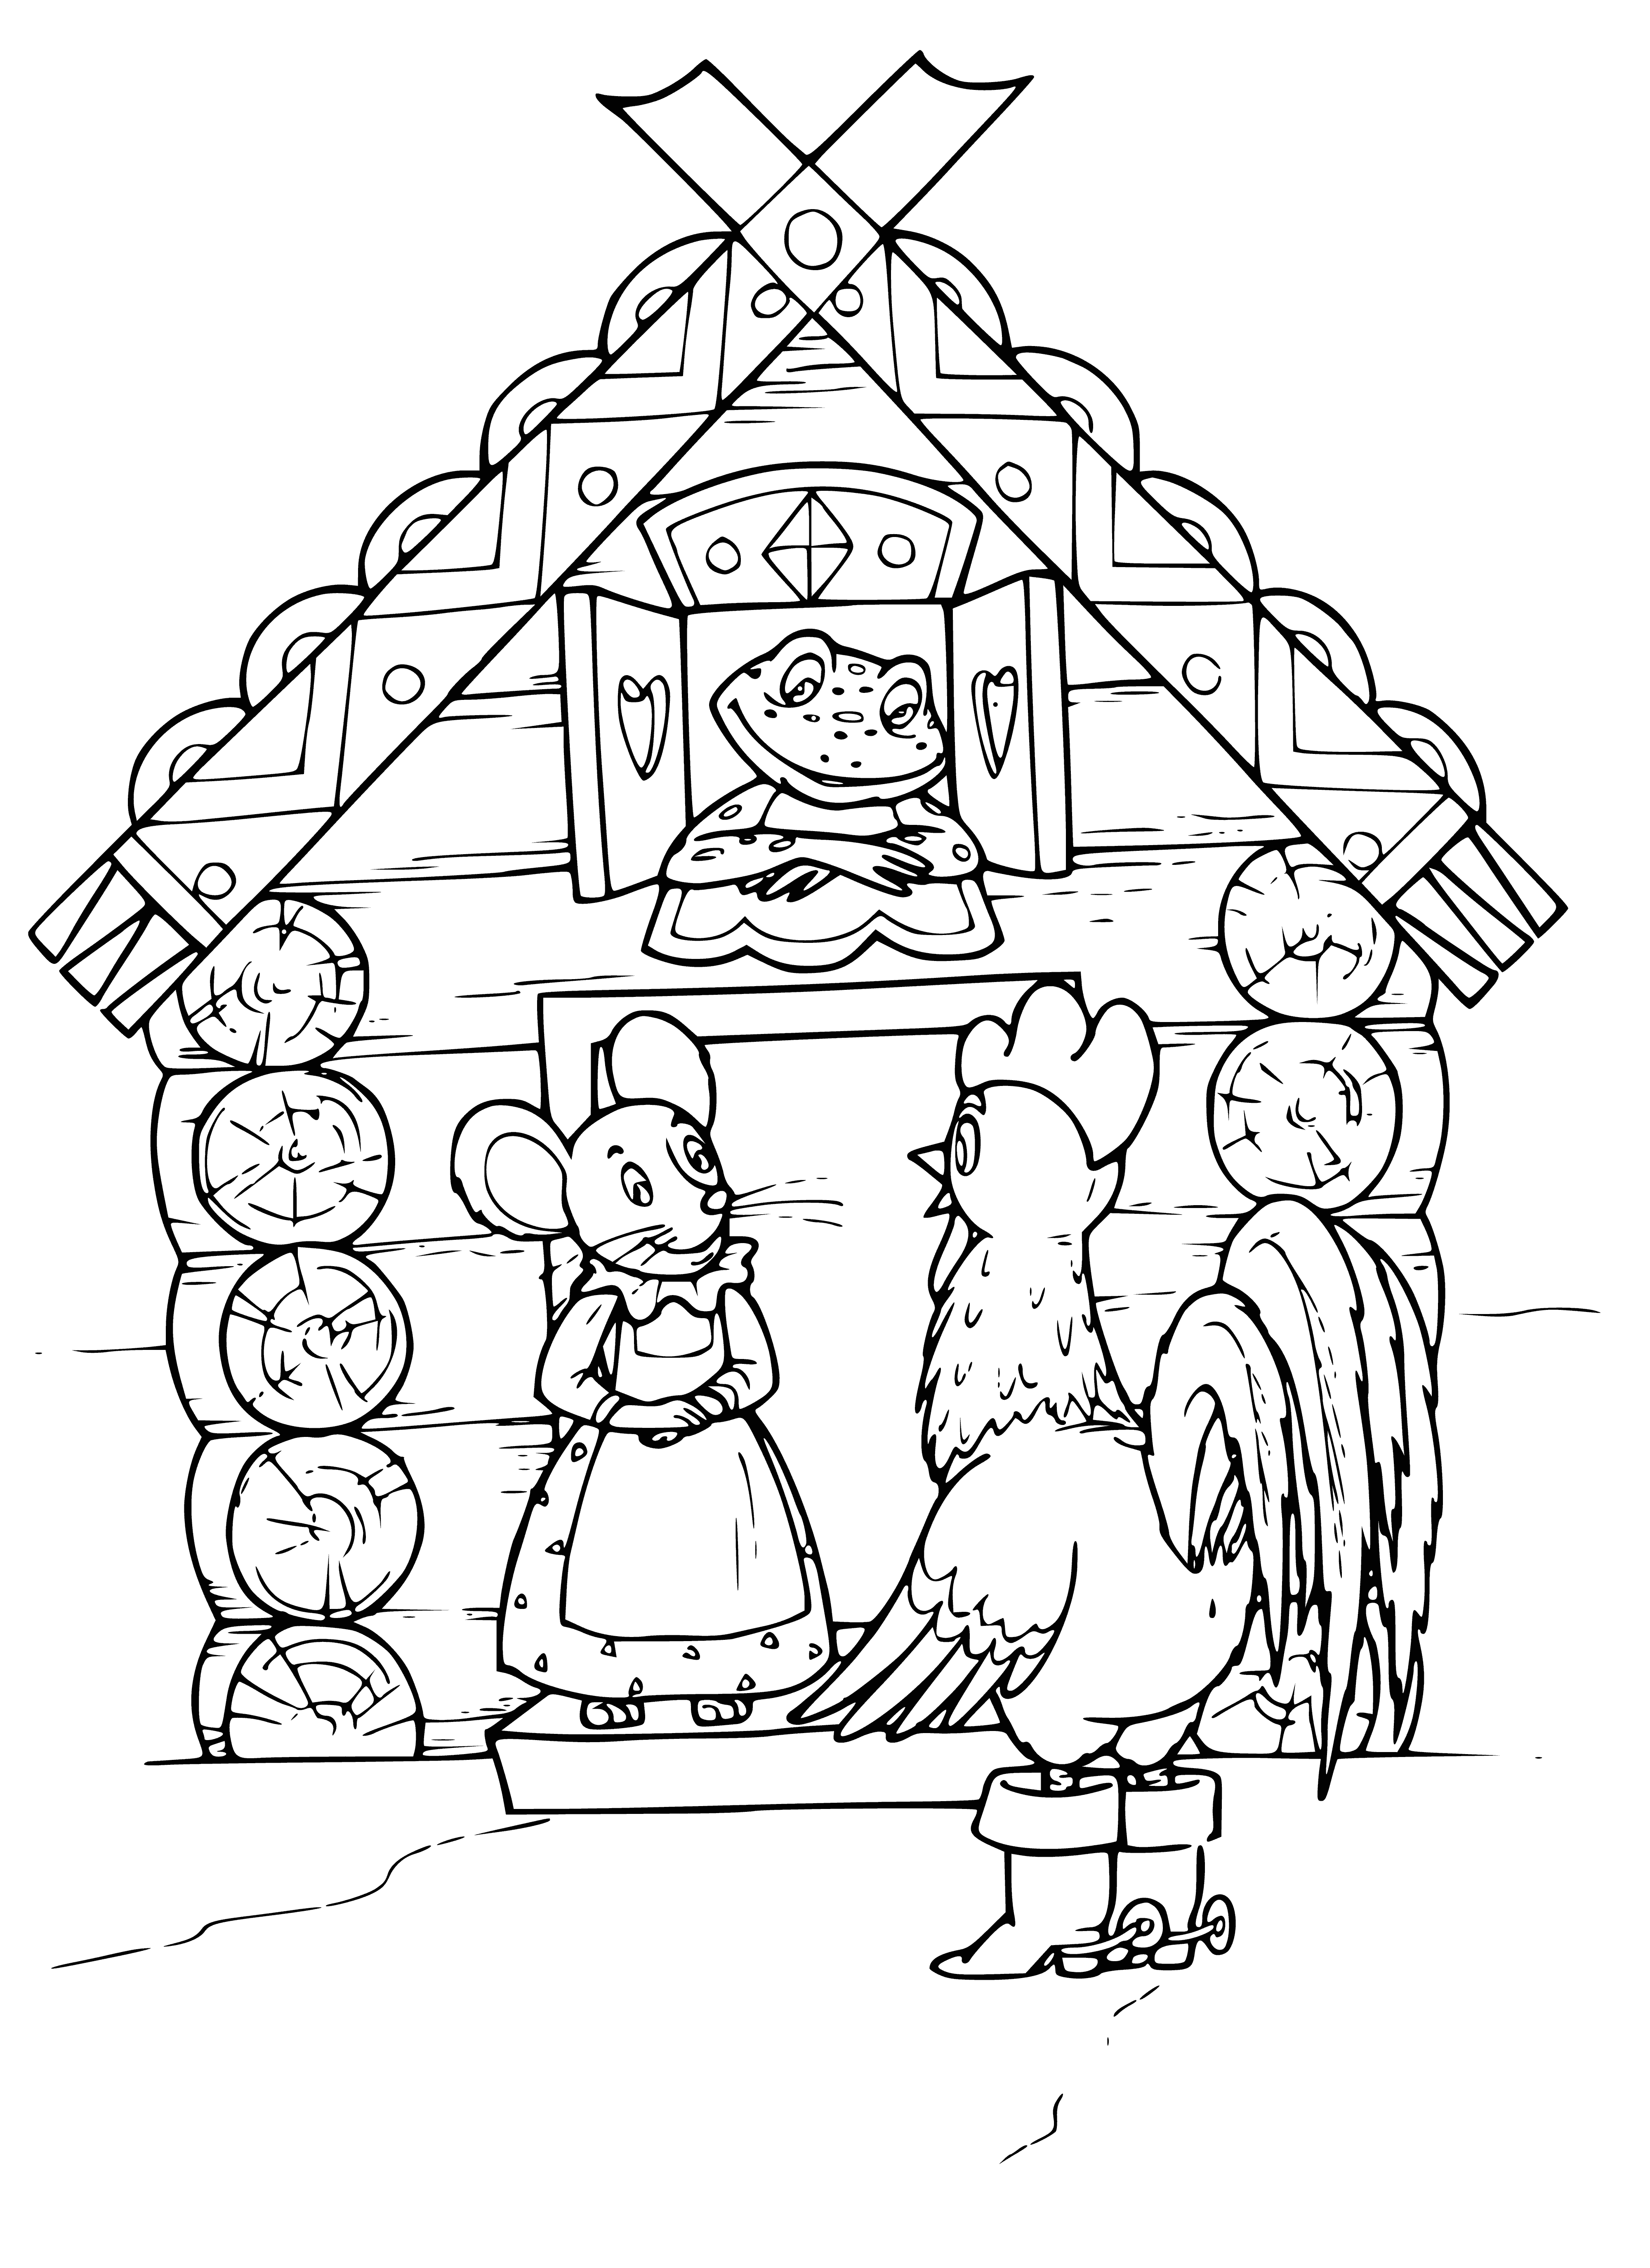 coloring page: Russian folktale castle, Teremok, surrounded by wall/drawbridge. Village left, forest right, mountain in distance.